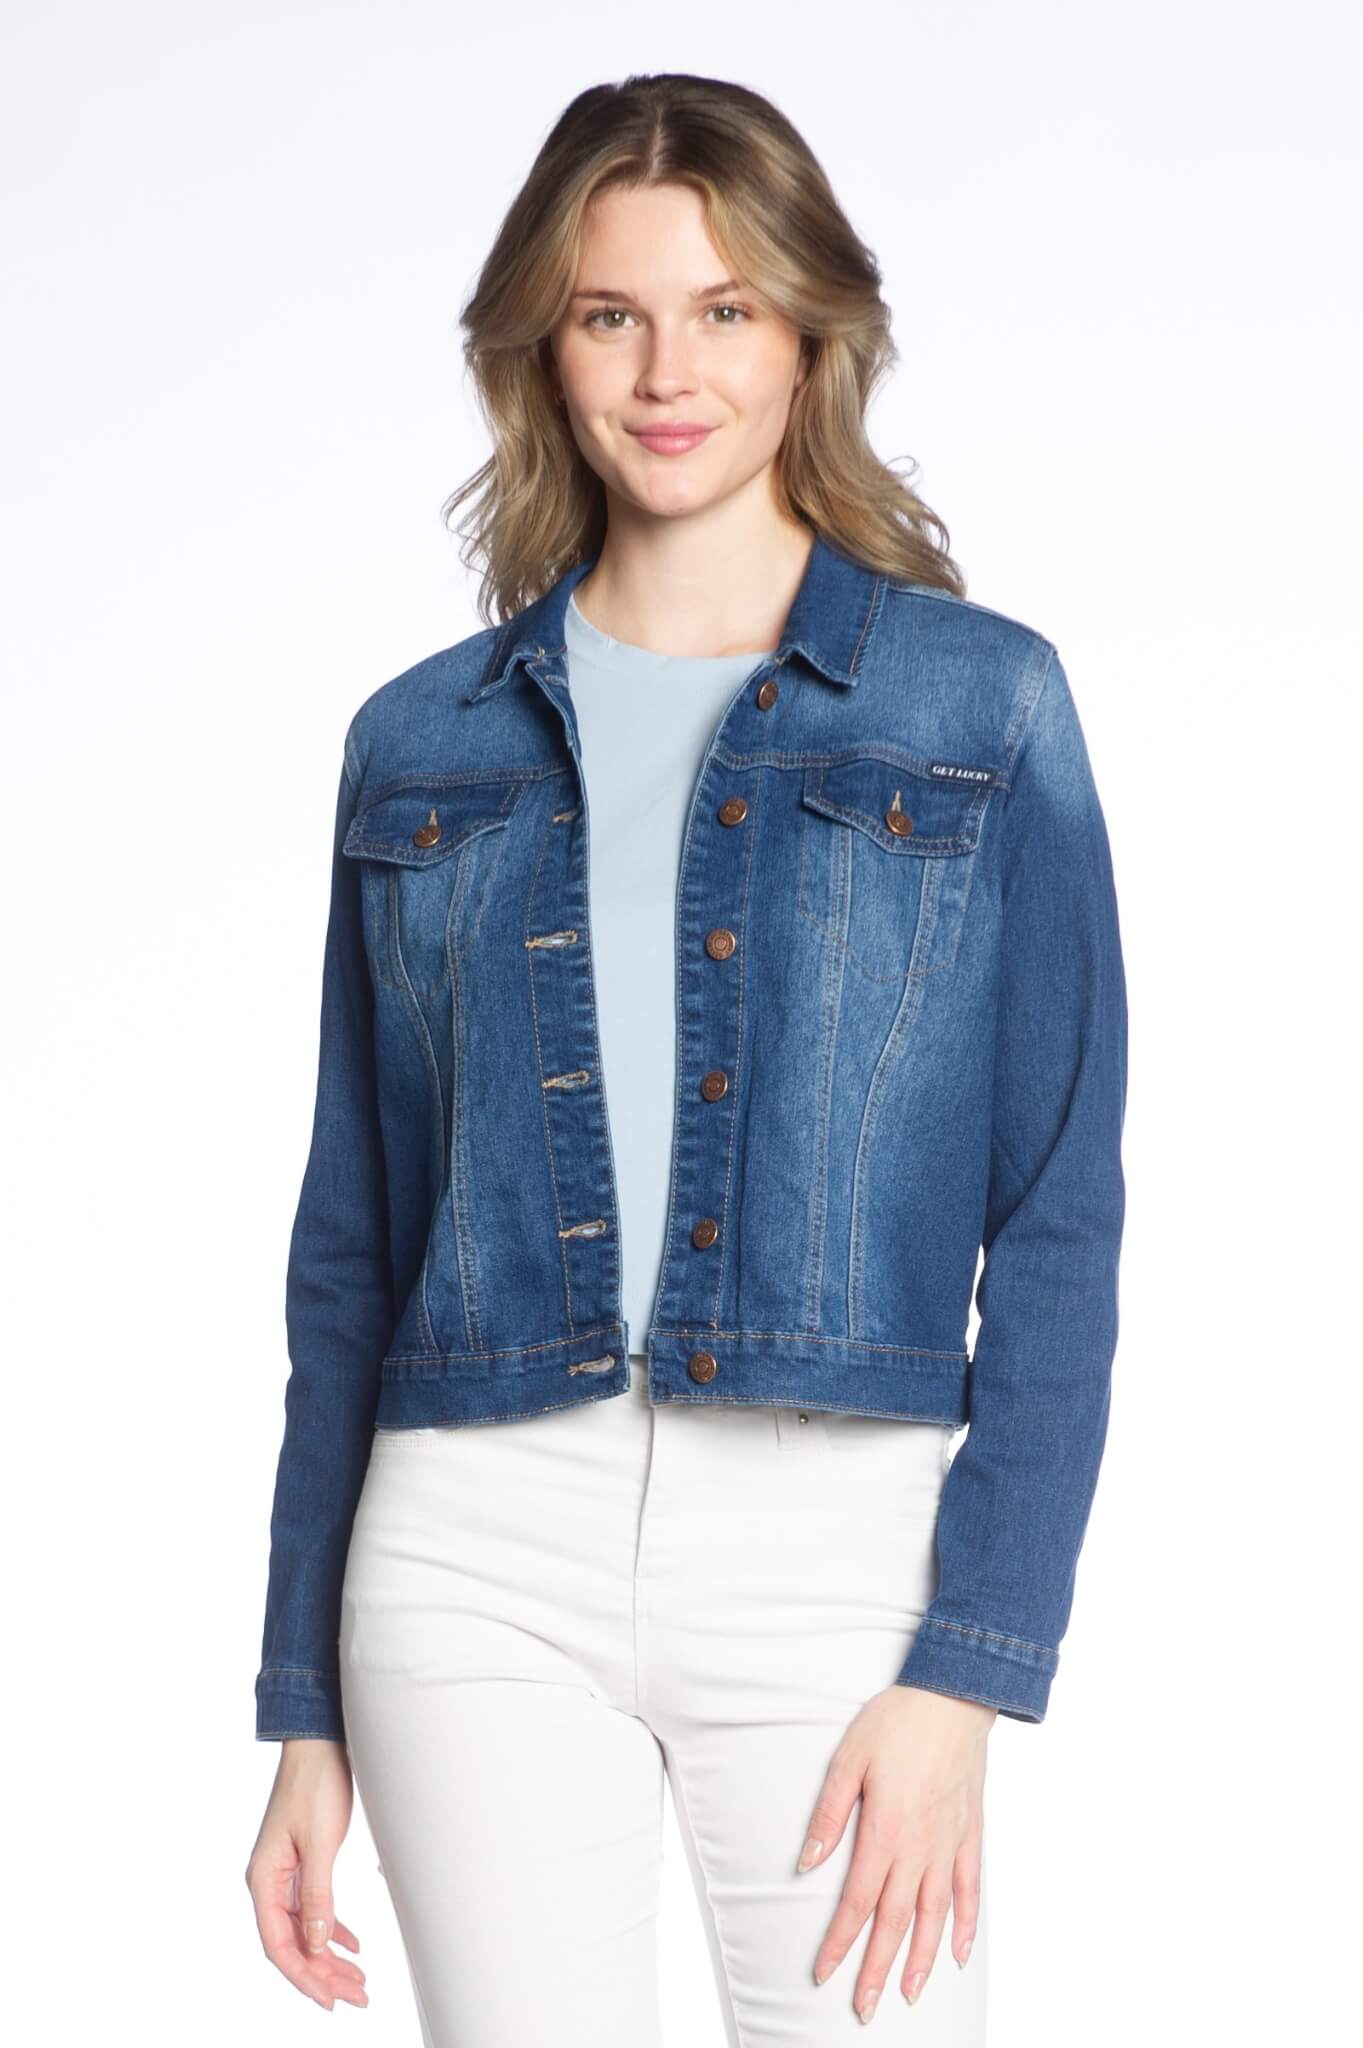 Ladies Denim Jacket - DKR & Company Apparel / Clothes Out Trading